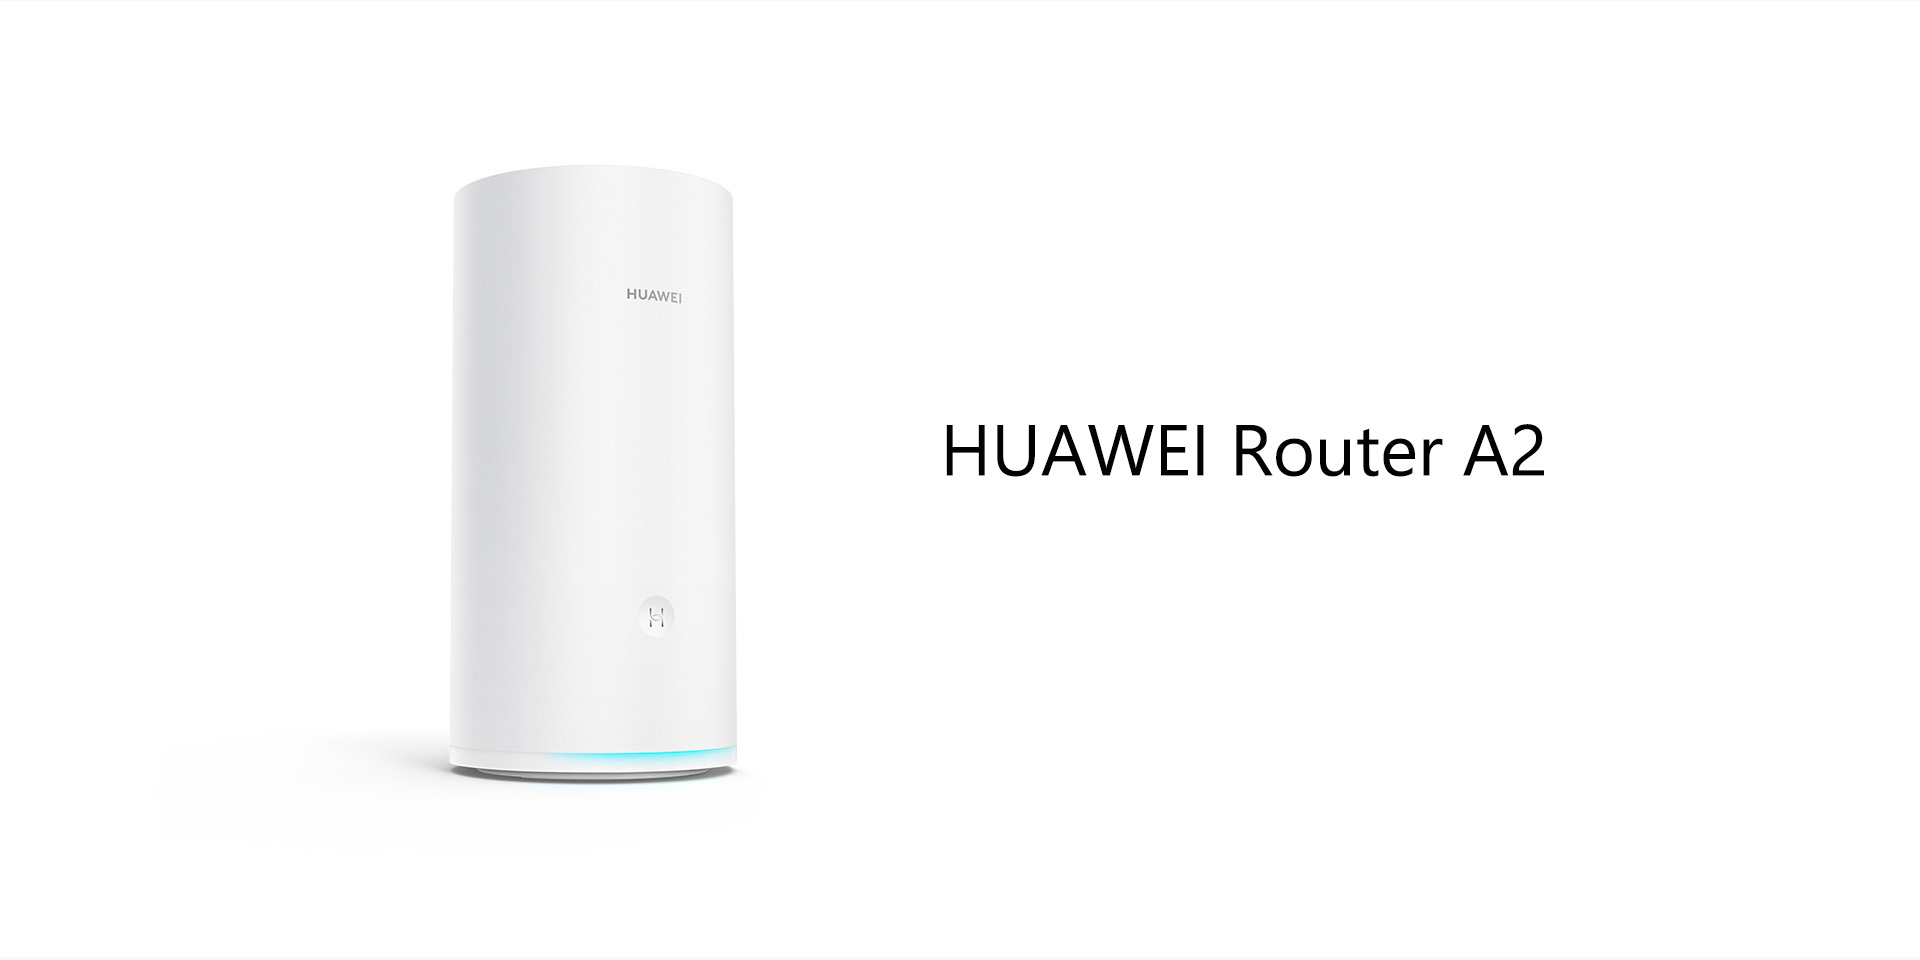 HUAWEI-Router-A2-Triple-Band-14GHz-CPU-256MB-2200M-WiFi-Quad-Core-Wireless-Router-WiFi-Router-1640051